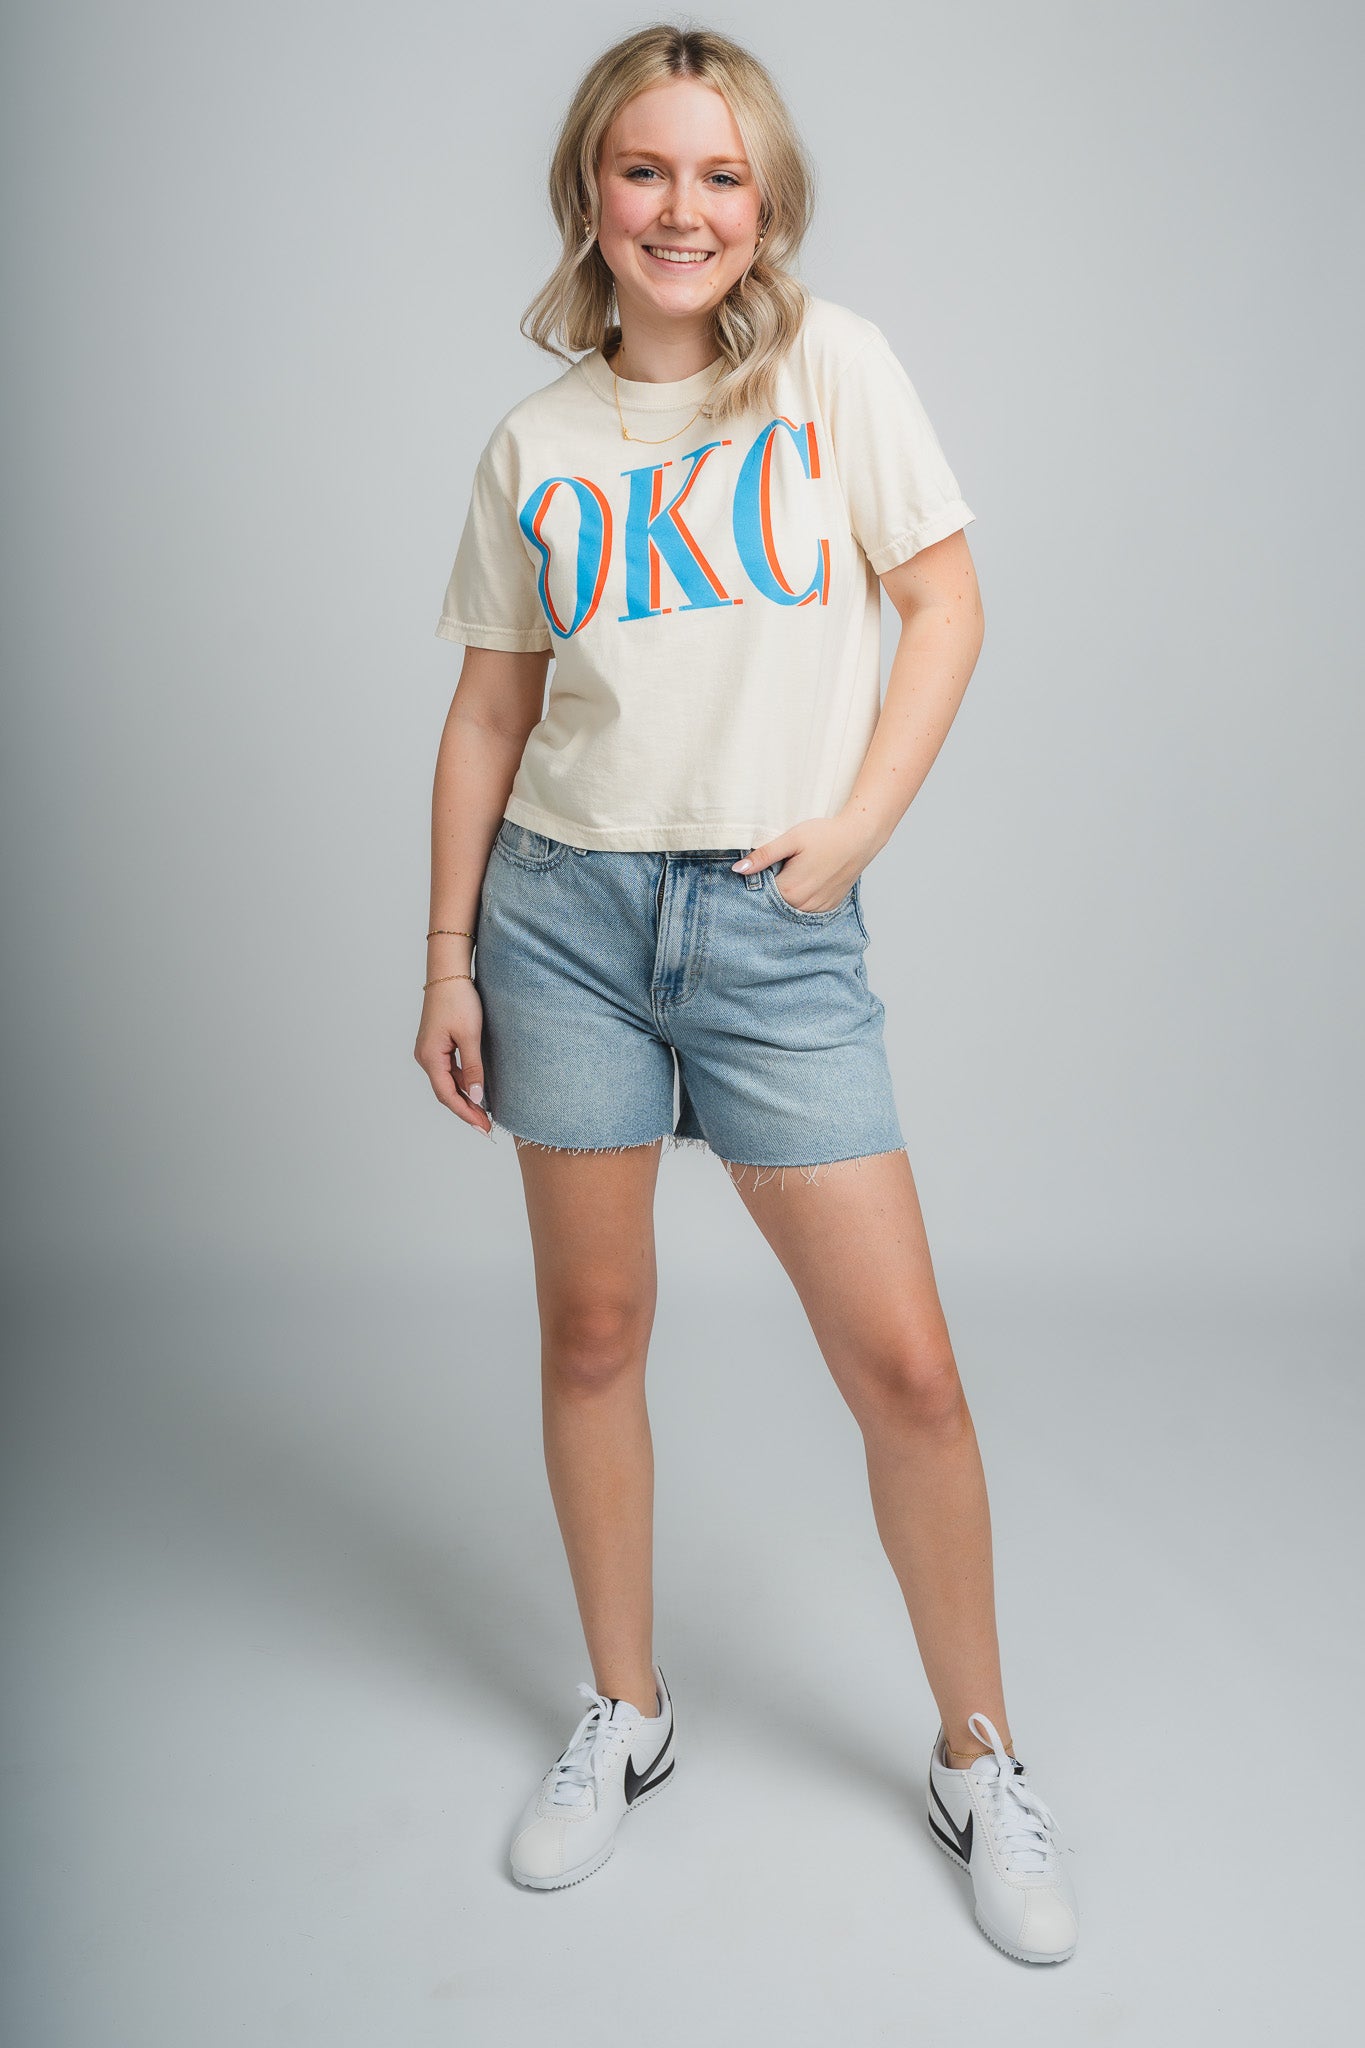 OKC vogue crop t-shirt - Oklahoma City inspired graphic t-shirts at Lush Fashion Lounge Boutique in Oklahoma City